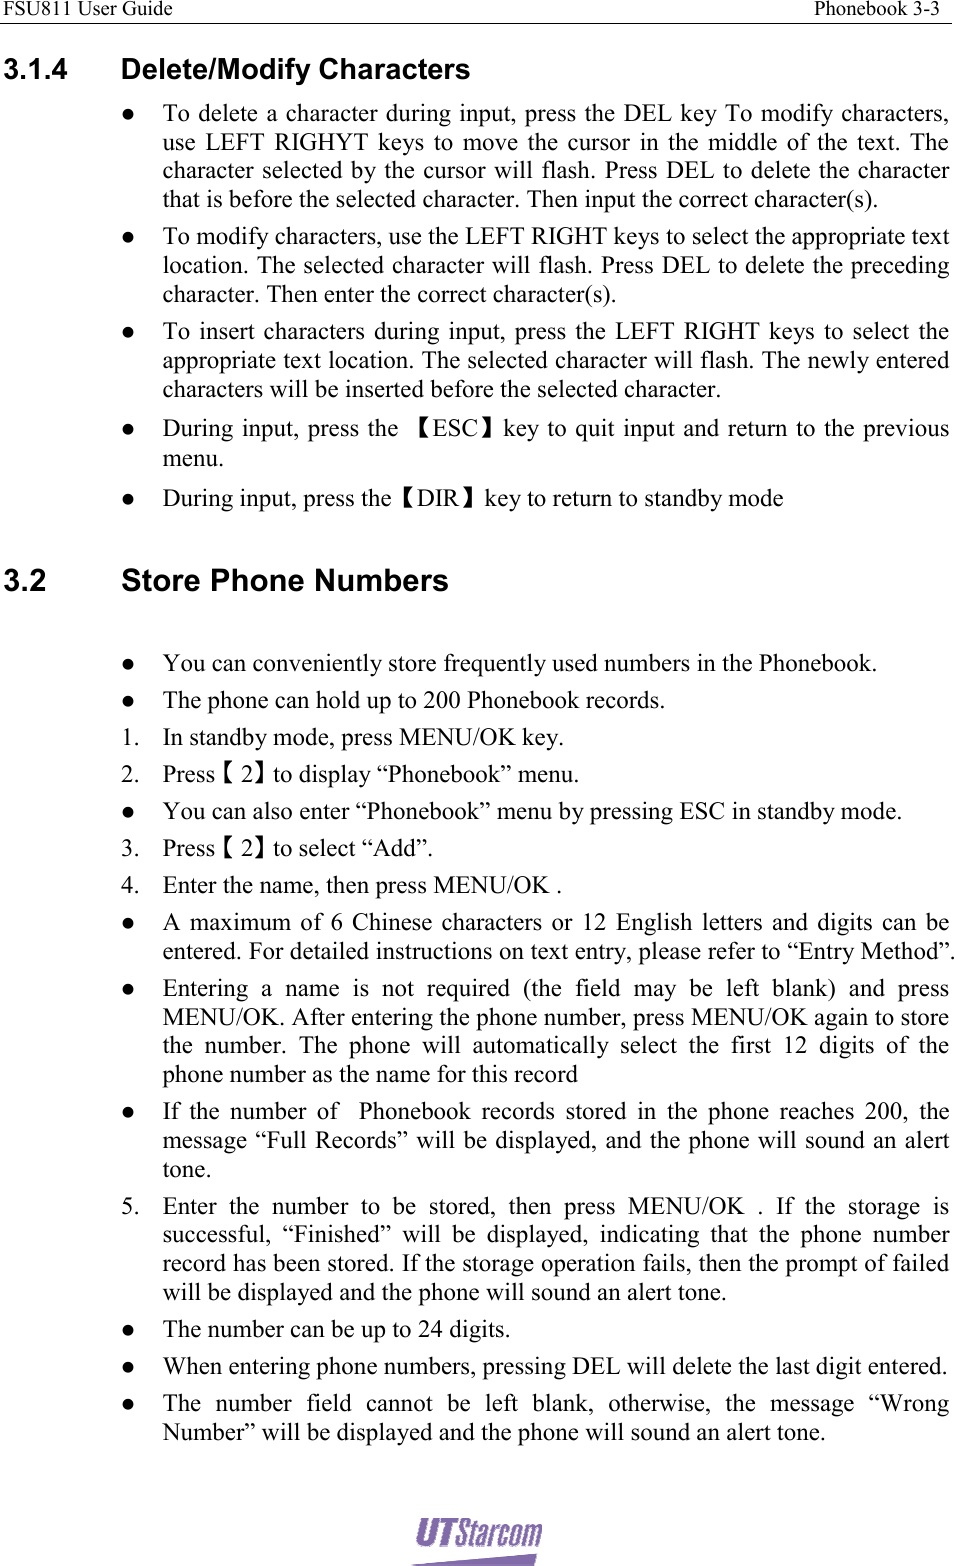 FSU811 User Guide                                                                                                                           Phonebook 3-3  3.1.4 Delete/Modify Characters z To delete a character during input, press the DEL key To modify characters, use LEFT RIGHYT keys to move the cursor in the middle of the text. The character selected by the cursor will flash. Press DEL to delete the character that is before the selected character. Then input the correct character(s). z To modify characters, use the LEFT RIGHT keys to select the appropriate text location. The selected character will flash. Press DEL to delete the preceding character. Then enter the correct character(s). z To insert characters during input, press the LEFT RIGHT keys to select the appropriate text location. The selected character will flash. The newly entered characters will be inserted before the selected character. z During input, press the 【ESC】key to quit input and return to the previous menu. z During input, press the【DIR】key to return to standby mode  3.2  Store Phone Numbers  z You can conveniently store frequently used numbers in the Phonebook. z The phone can hold up to 200 Phonebook records. 1. In standby mode, press MENU/OK key. 2. Press 【】2 to display “Phonebook” menu. z You can also enter “Phonebook” menu by pressing ESC in standby mode. 3. Press 【】2 to select “Add”. 4. Enter the name, then press MENU/OK . z A maximum of 6 Chinese characters or 12 English letters and digits can be entered. For detailed instructions on text entry, please refer to “Entry Method”. z Entering a name is not required (the field may be left blank) and press MENU/OK. After entering the phone number, press MENU/OK again to store the number. The phone will automatically select the first 12 digits of the phone number as the name for this record z If the number of  Phonebook records stored in the phone reaches 200, the message “Full Records” will be displayed, and the phone will sound an alert tone. 5. Enter the number to be stored, then press MENU/OK . If the storage is successful, “Finished” will be displayed, indicating that the phone number record has been stored. If the storage operation fails, then the prompt of failed will be displayed and the phone will sound an alert tone. z The number can be up to 24 digits. z When entering phone numbers, pressing DEL will delete the last digit entered. z The number field cannot be left blank, otherwise, the message “Wrong Number” will be displayed and the phone will sound an alert tone. 